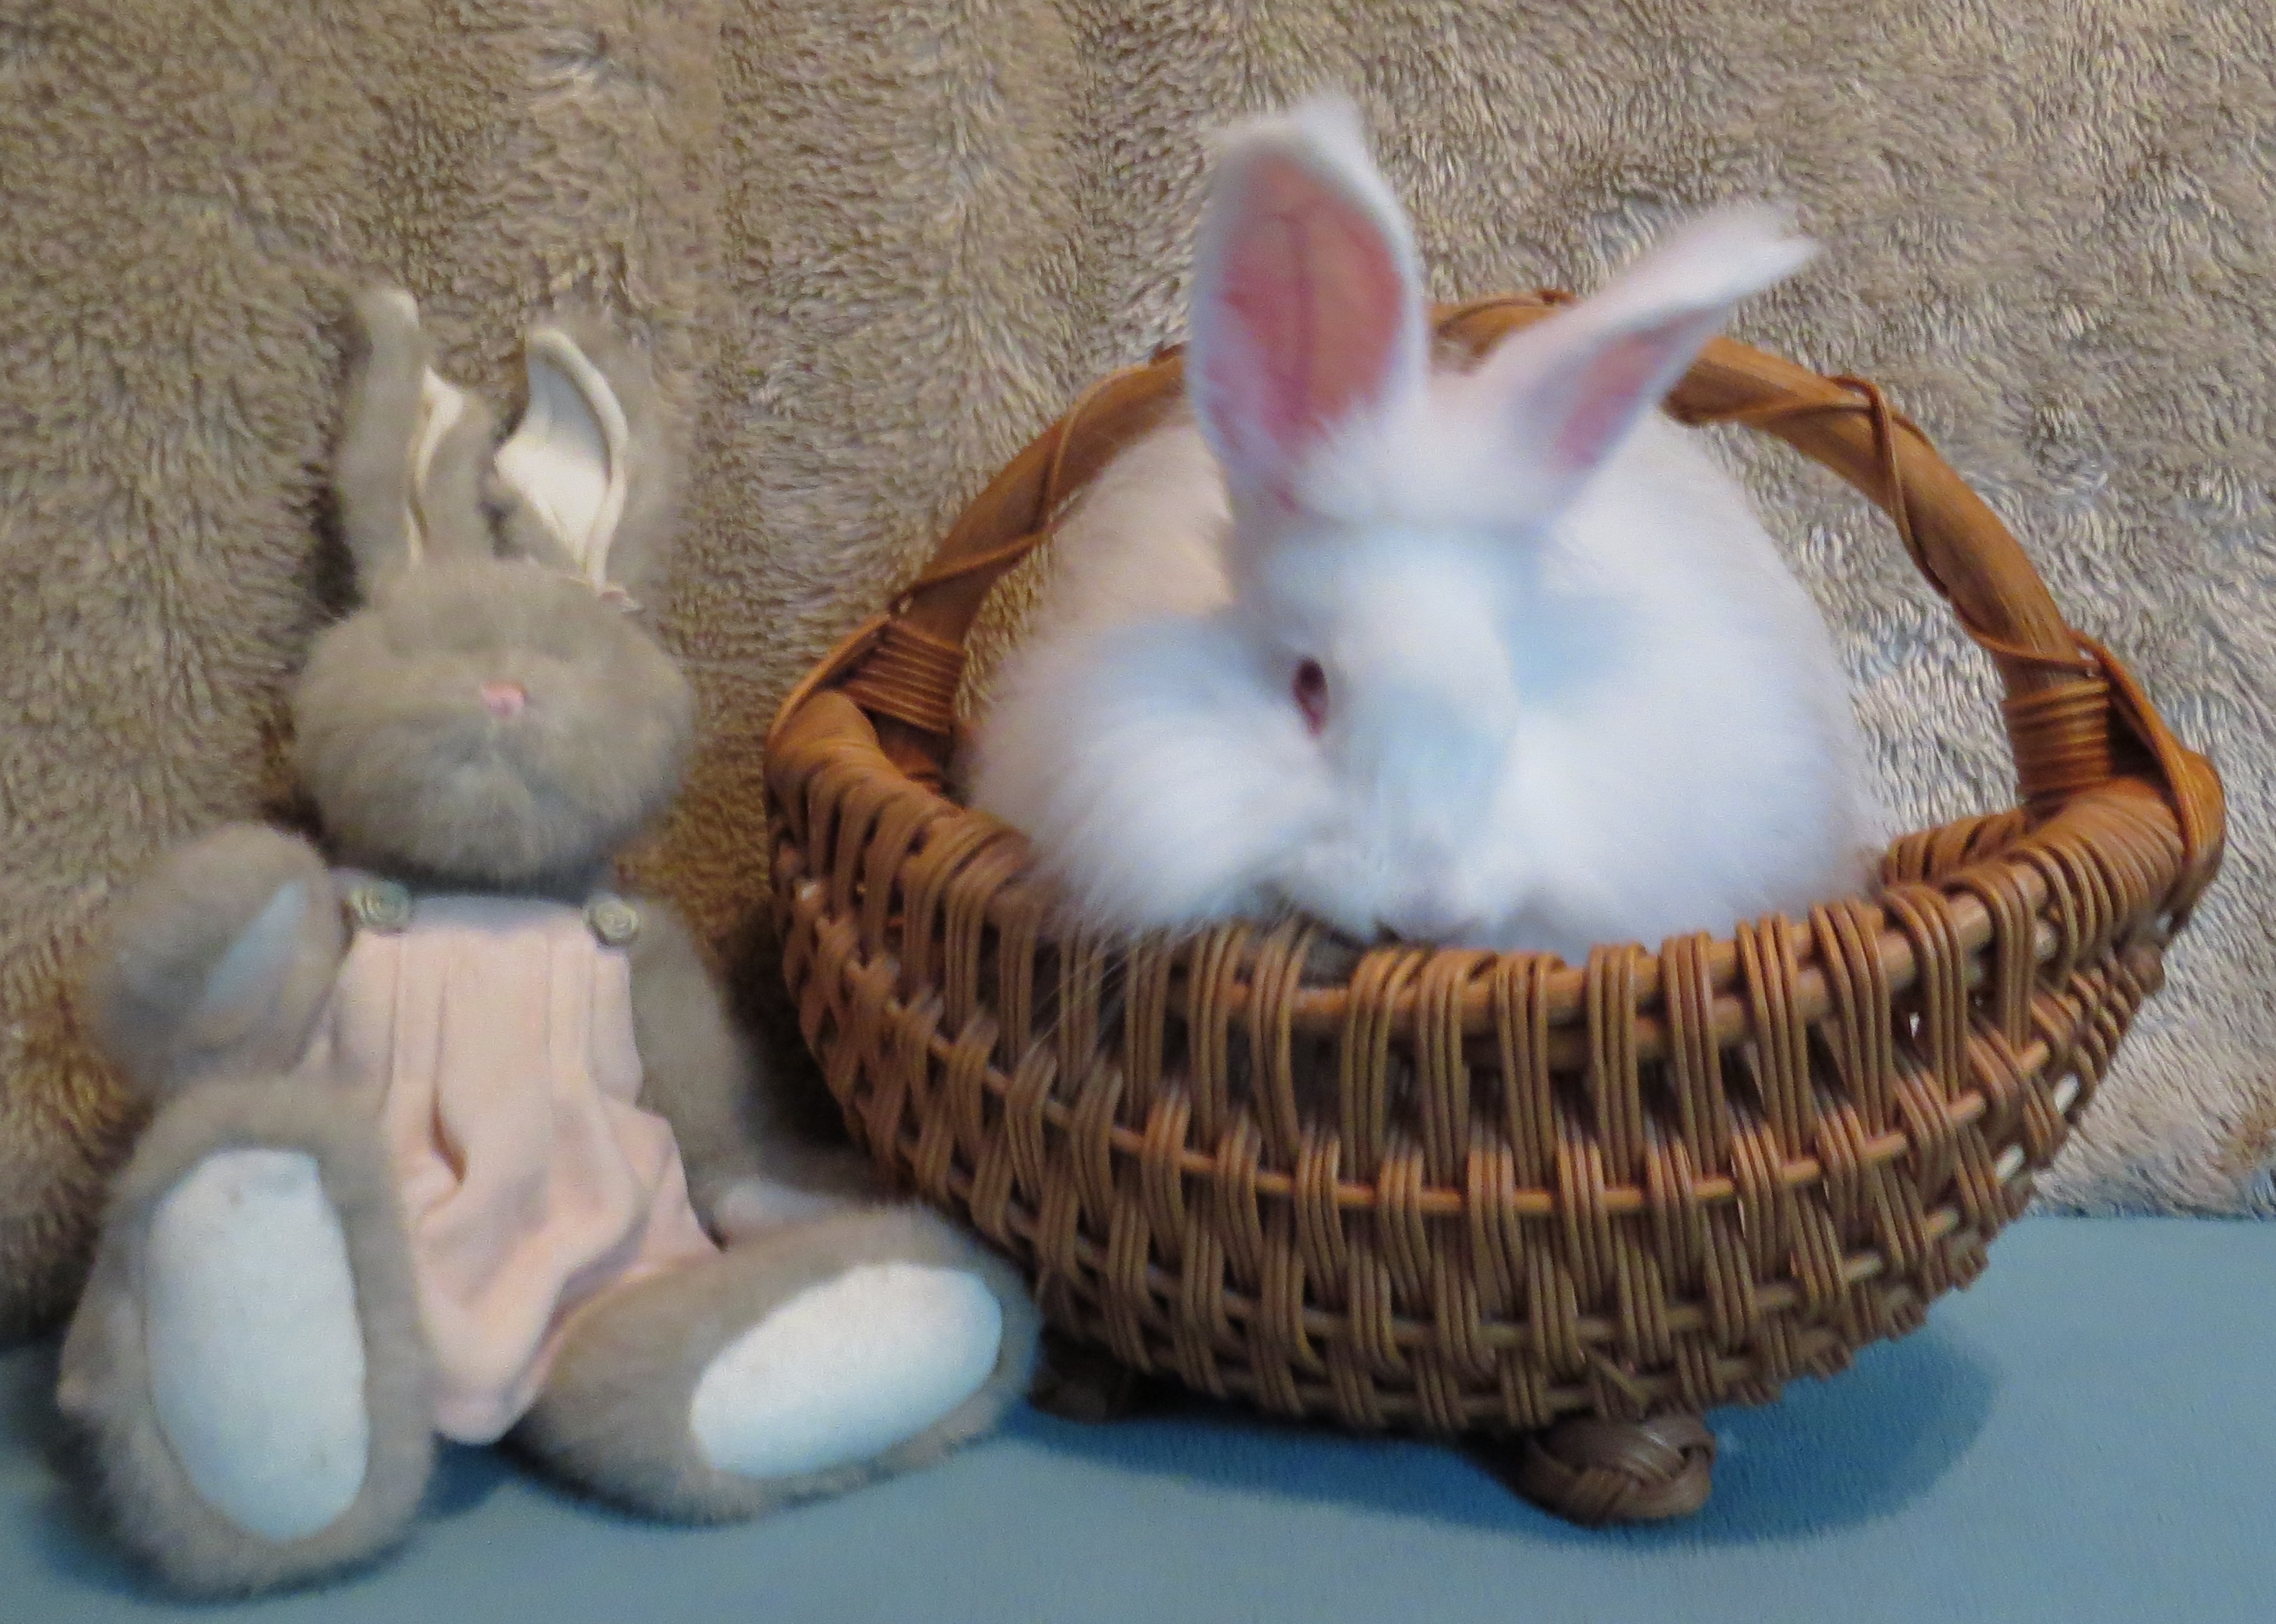 OMG!  It's Abby Rose, my pedigree German angora doe!  Well she's only 9 weeks old in this picture, I guess I can't trust her to stay in the basket forever lol!